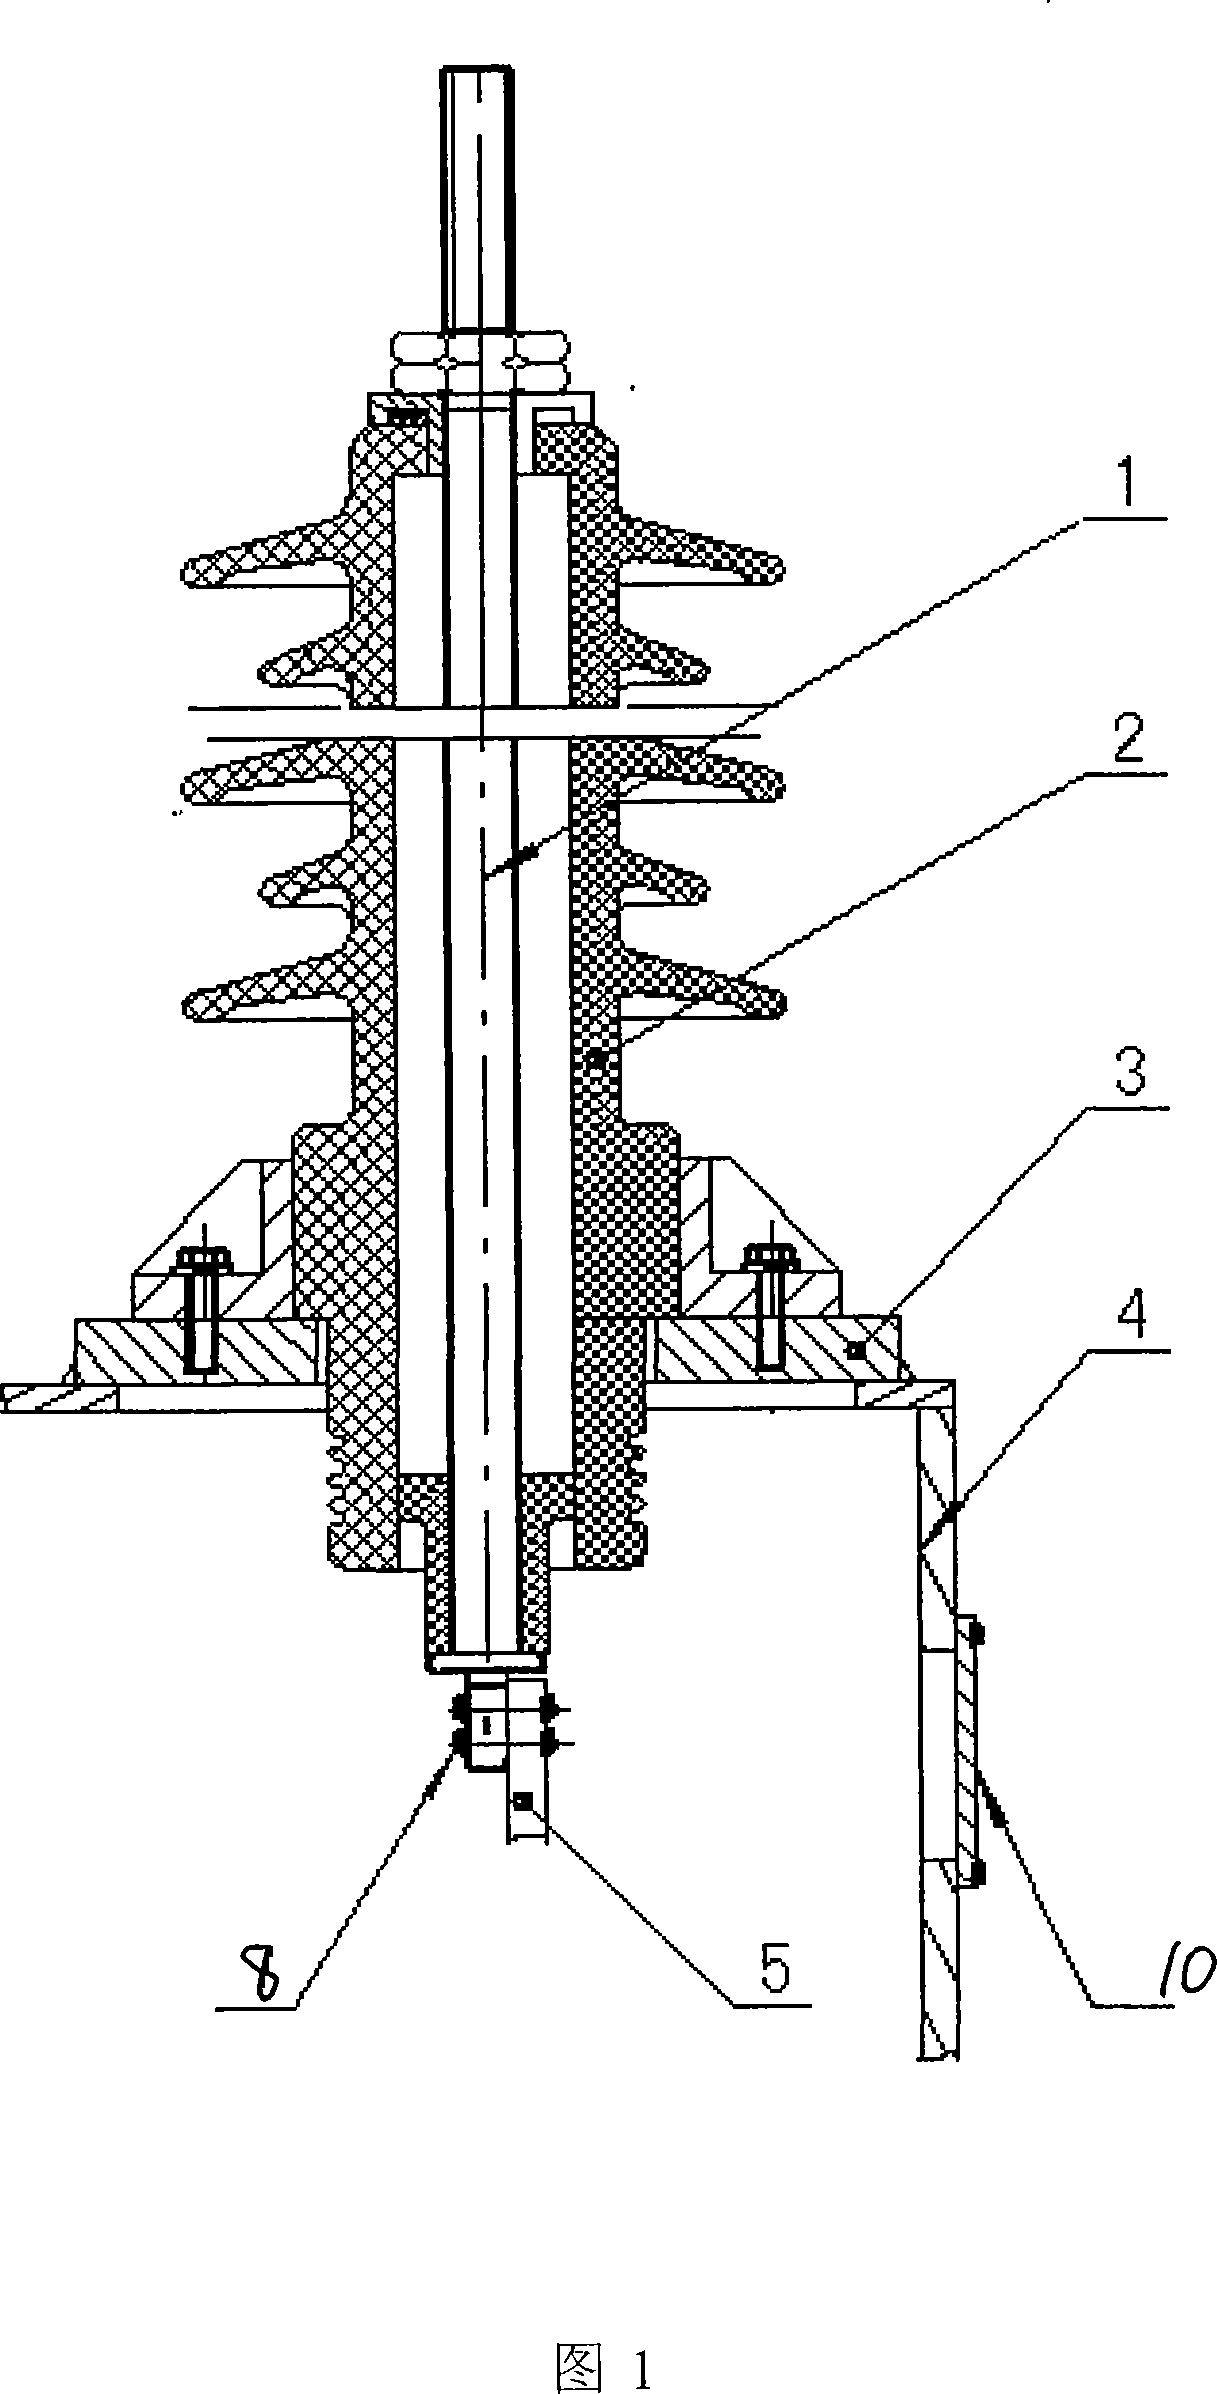 Transformer conducting bar and winding leads connection structure